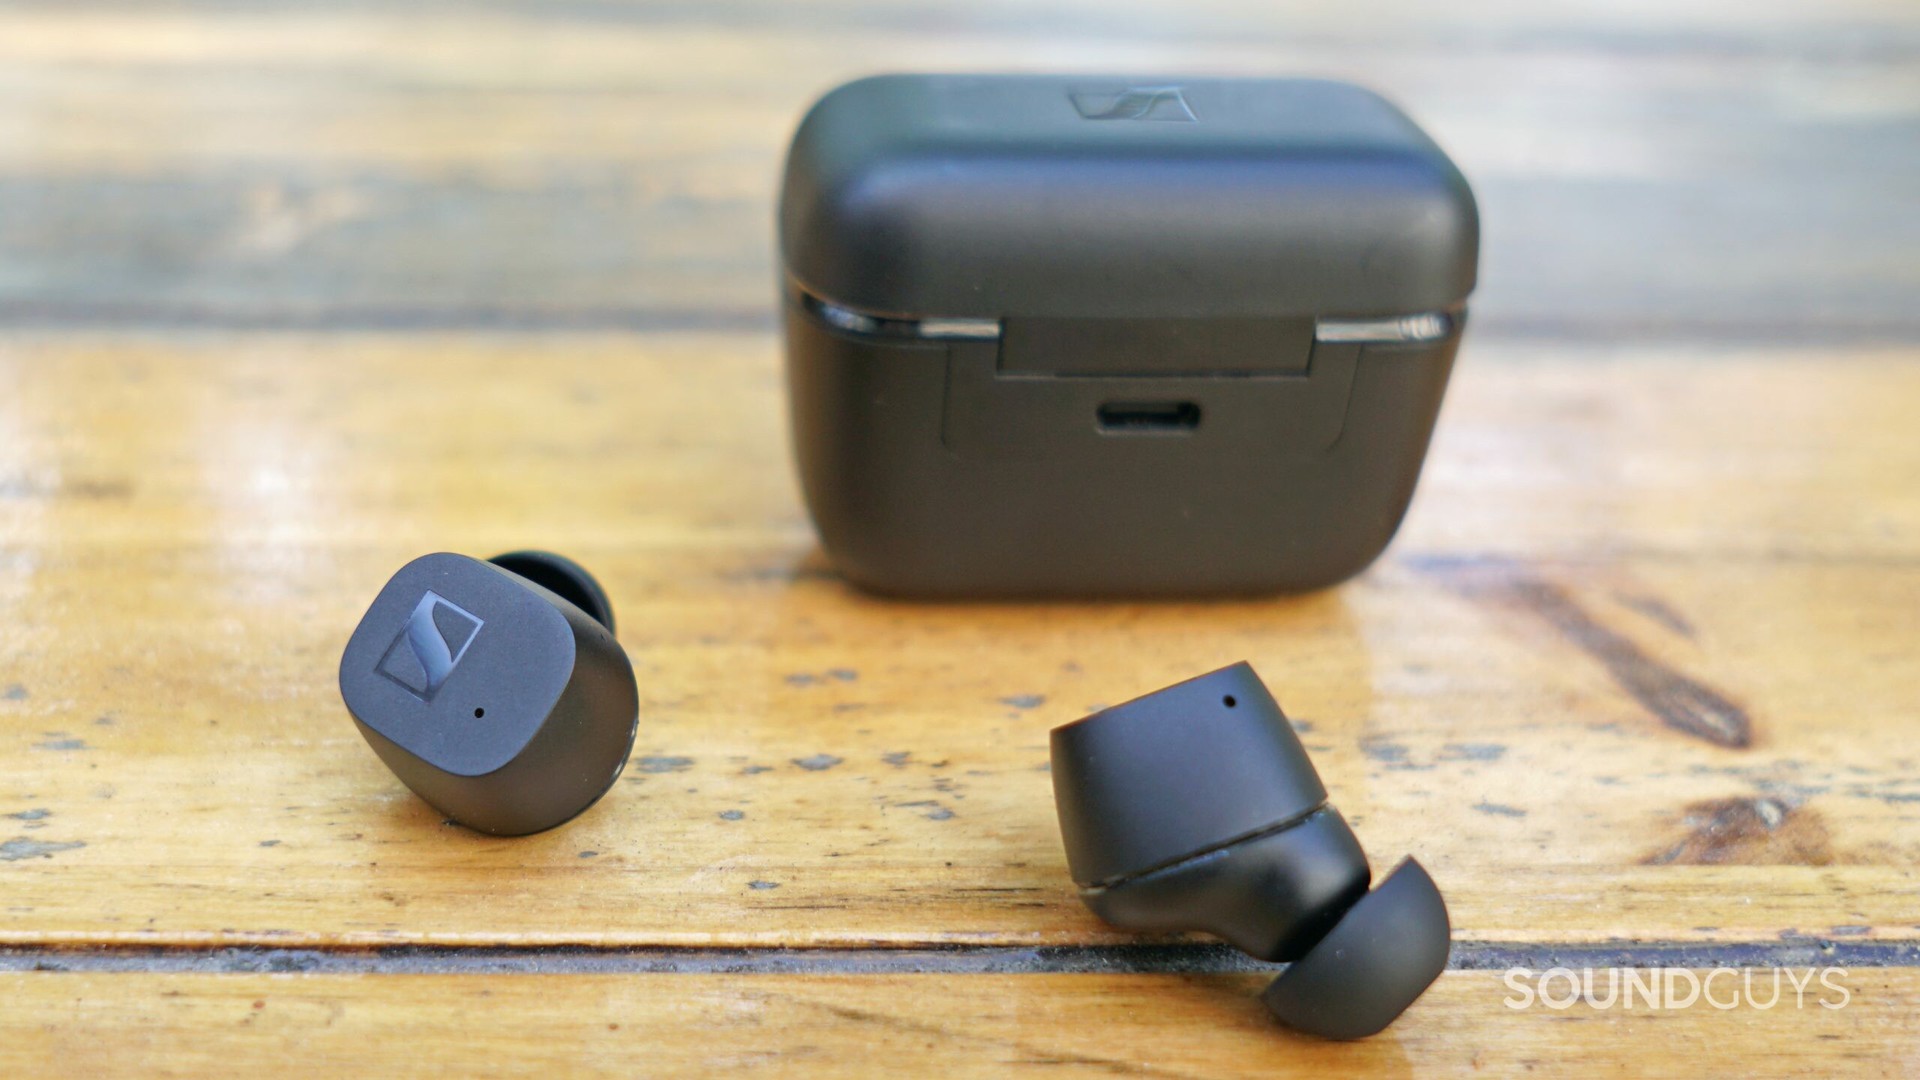 Sennheiser CX True Wireless Earbuds case and earbuds, displaying the charging port on the back of the case.